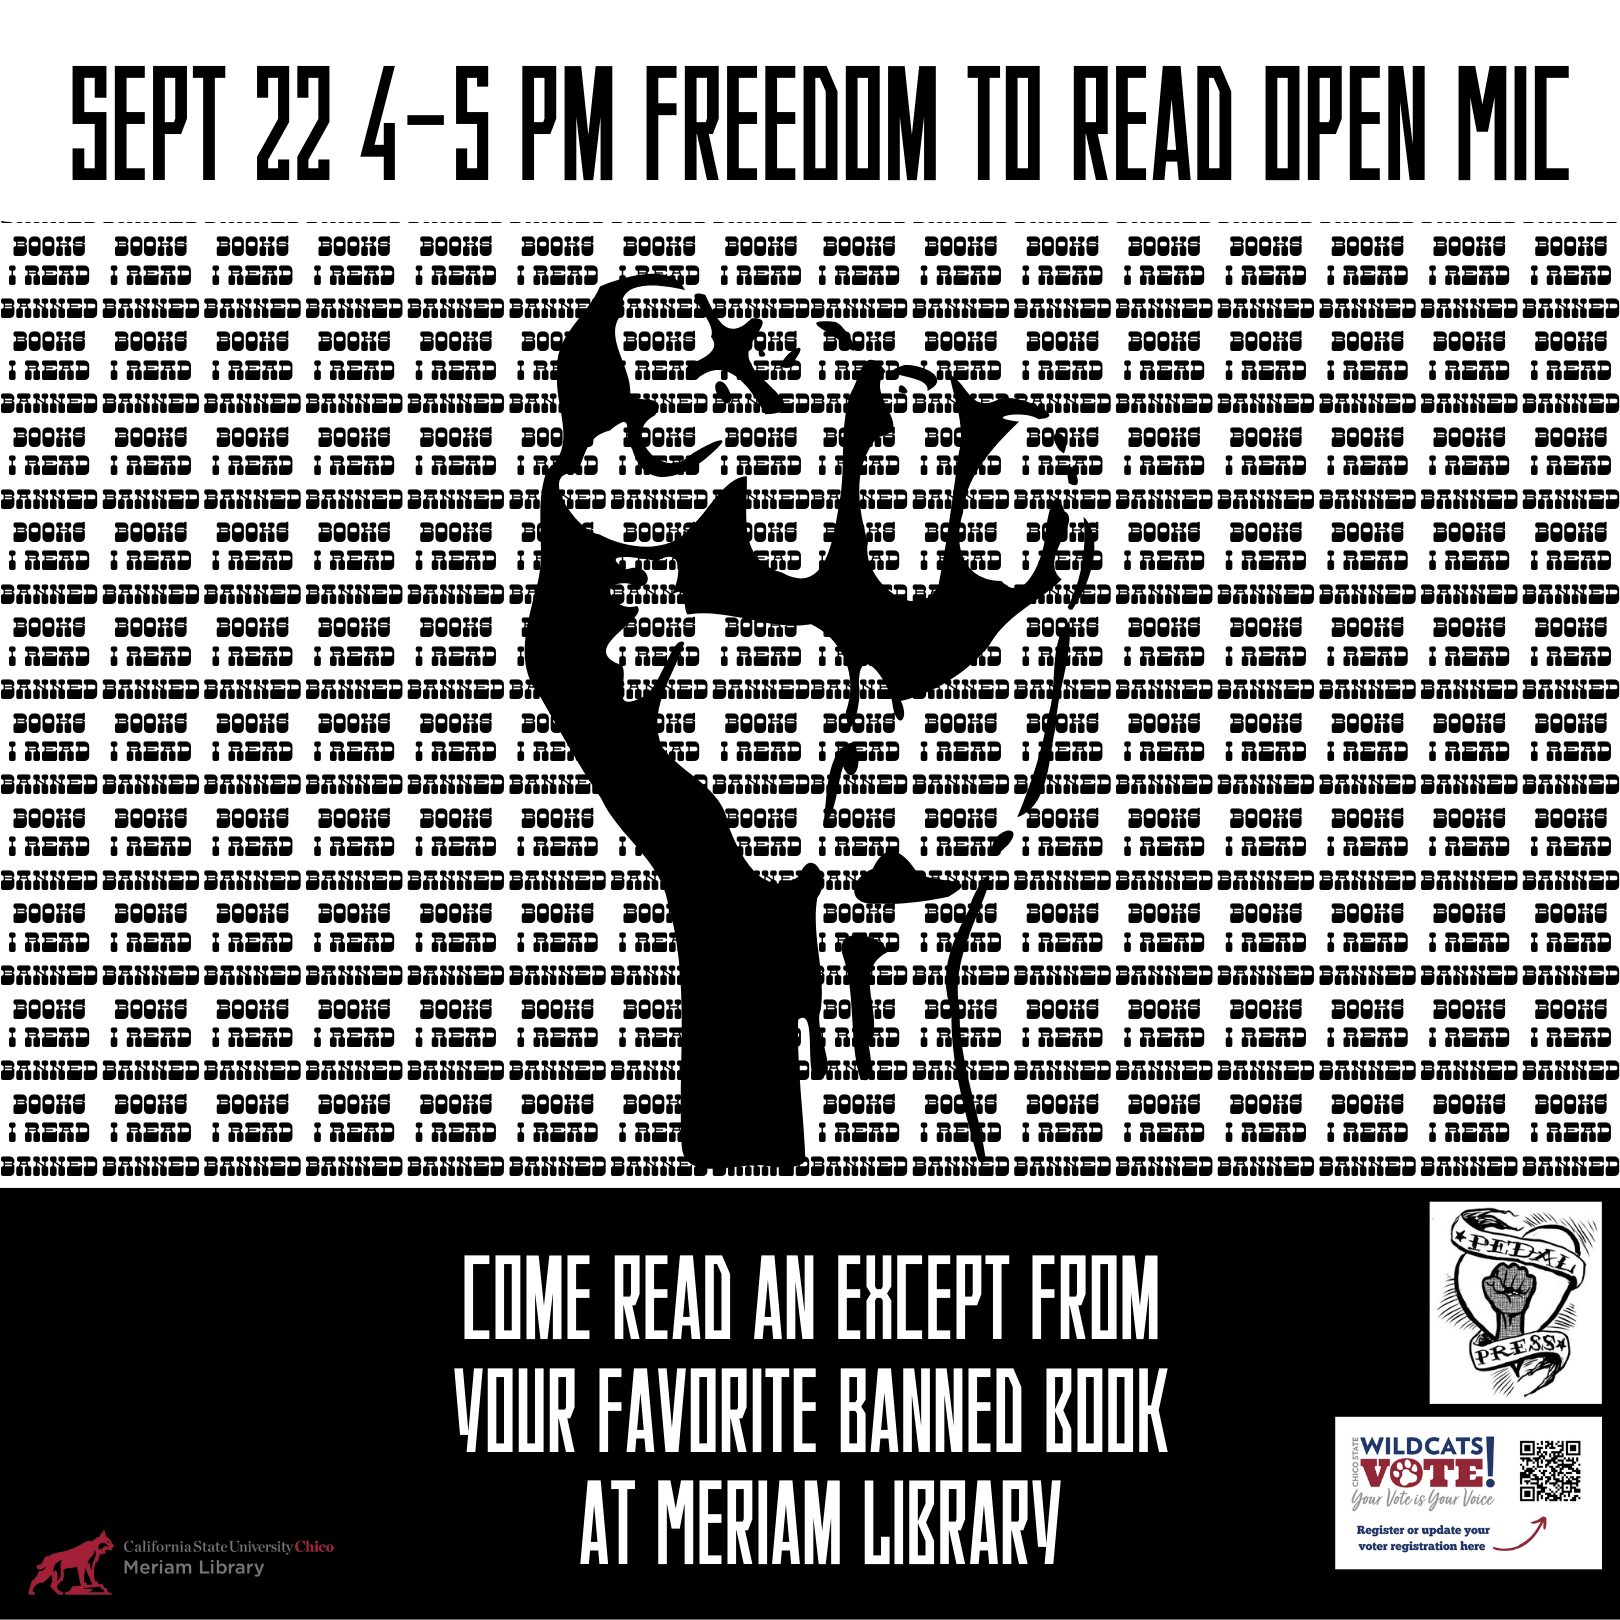 Freedom to Read Open Mic